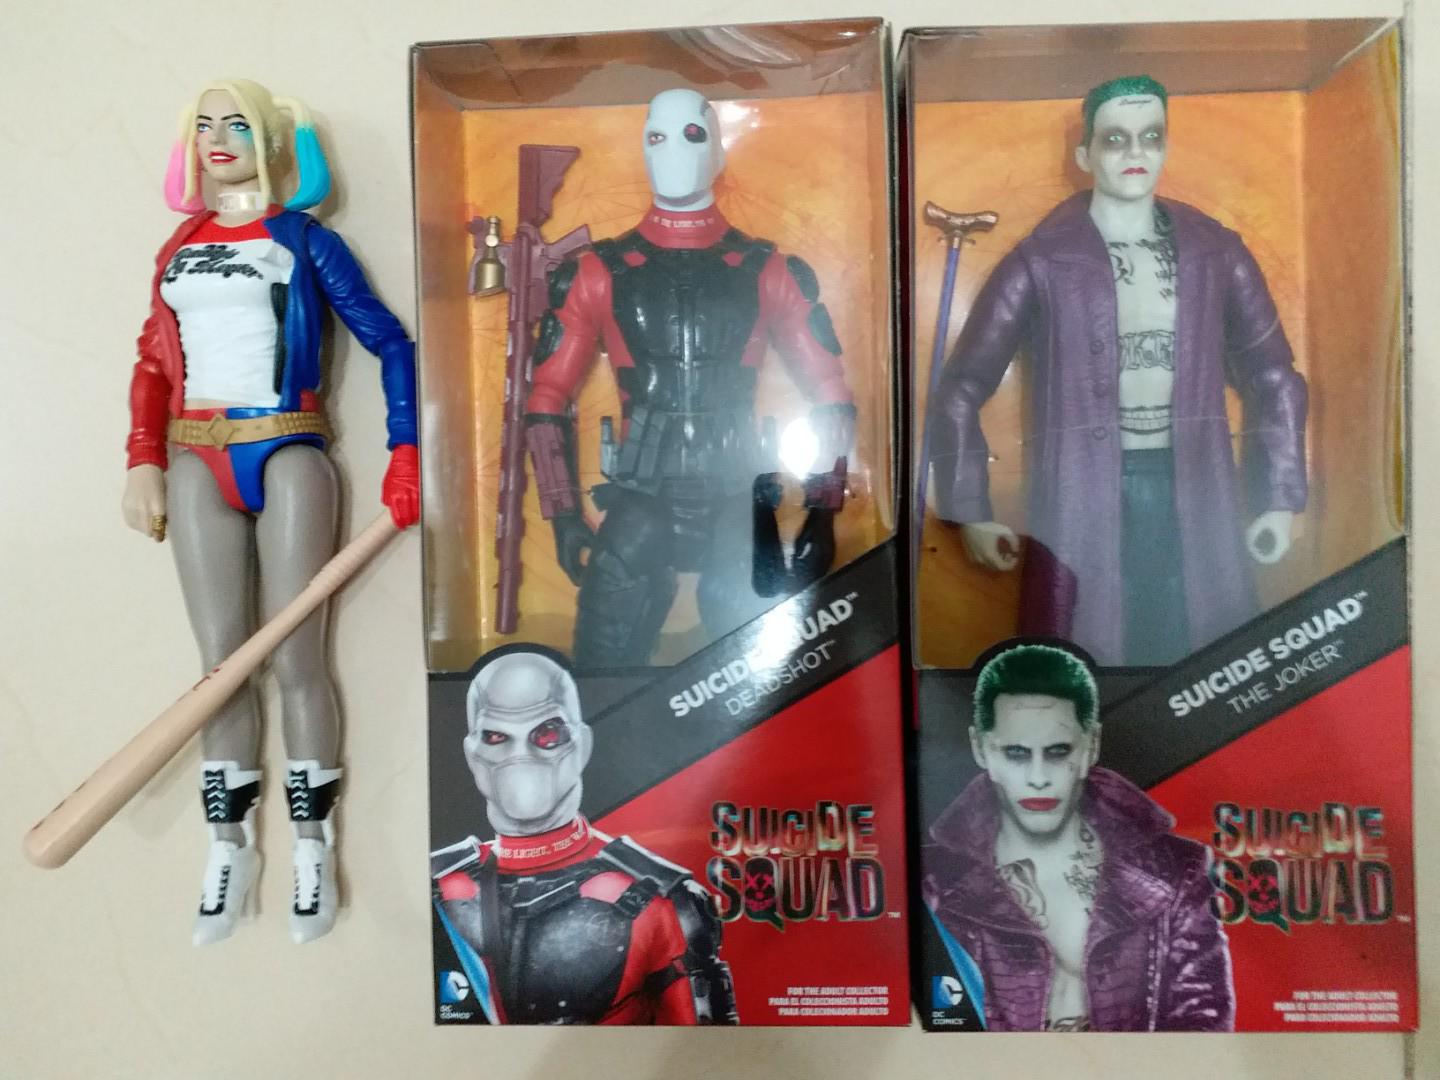 DC Multiverse Suicide Squad 12inch figure set, Harley Quinn opened